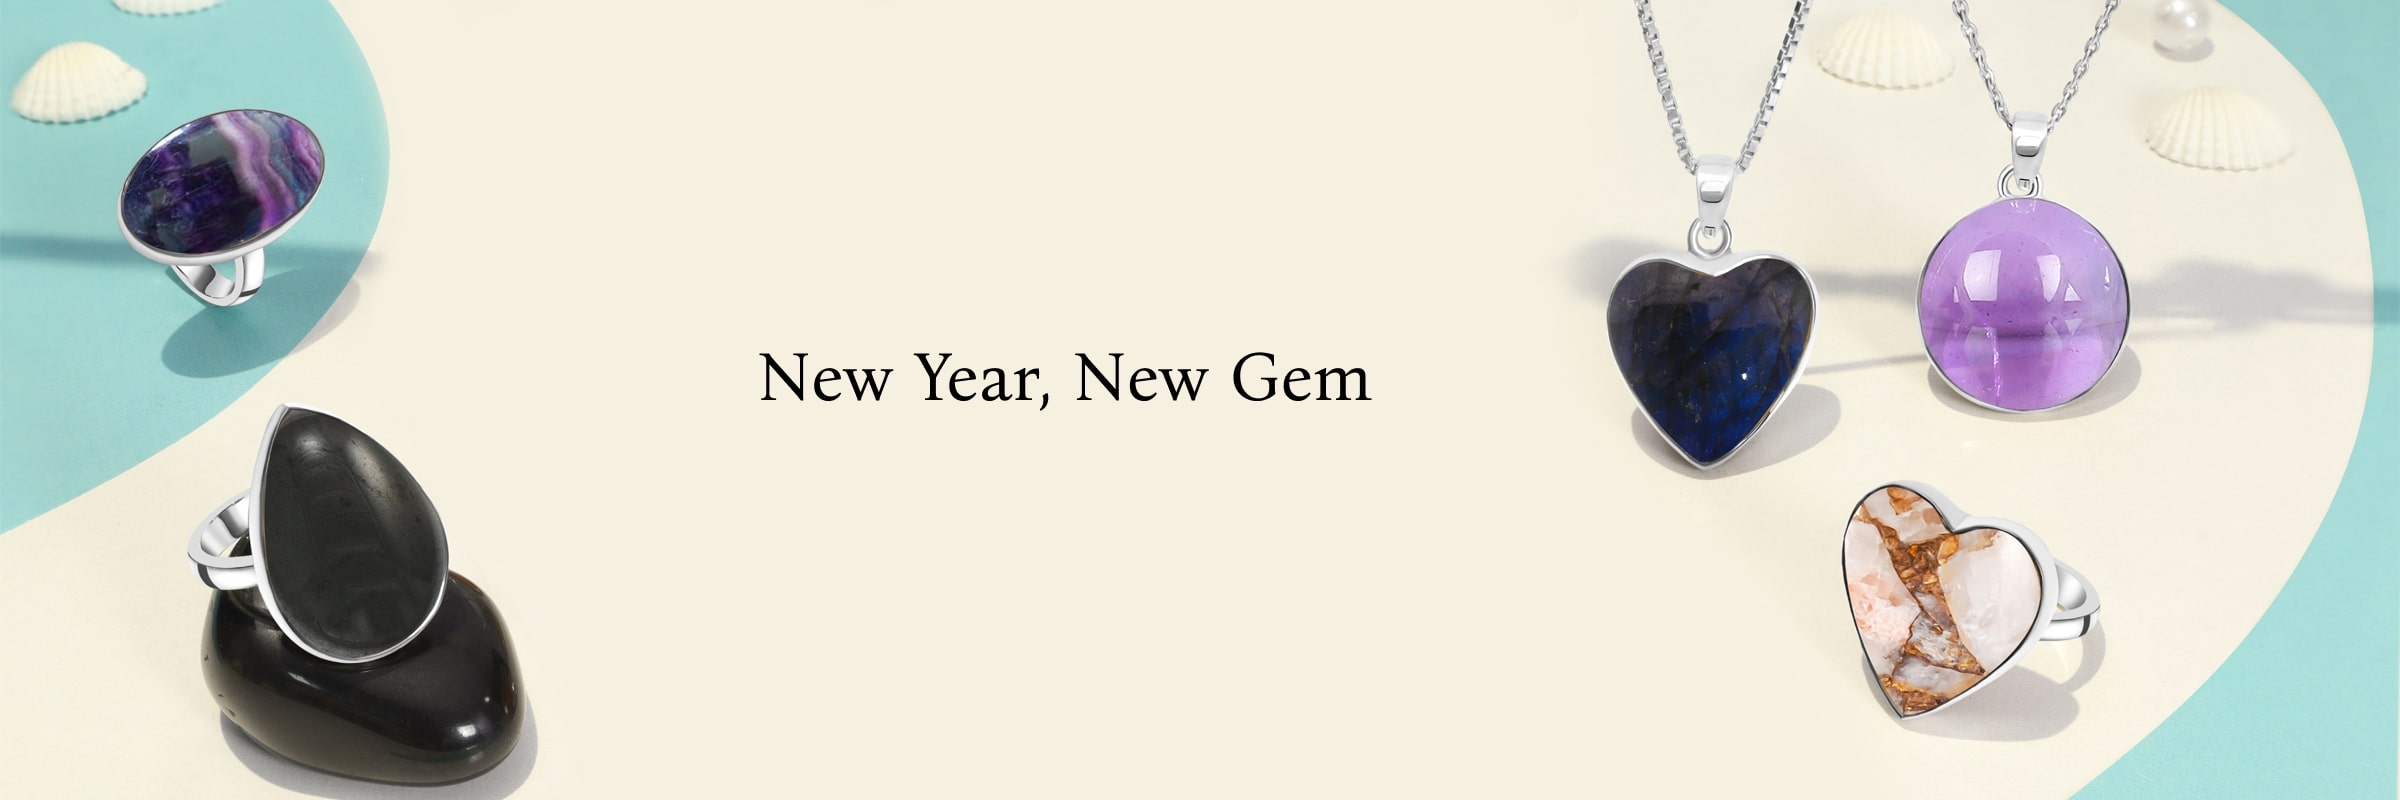 Gemstone for the new year